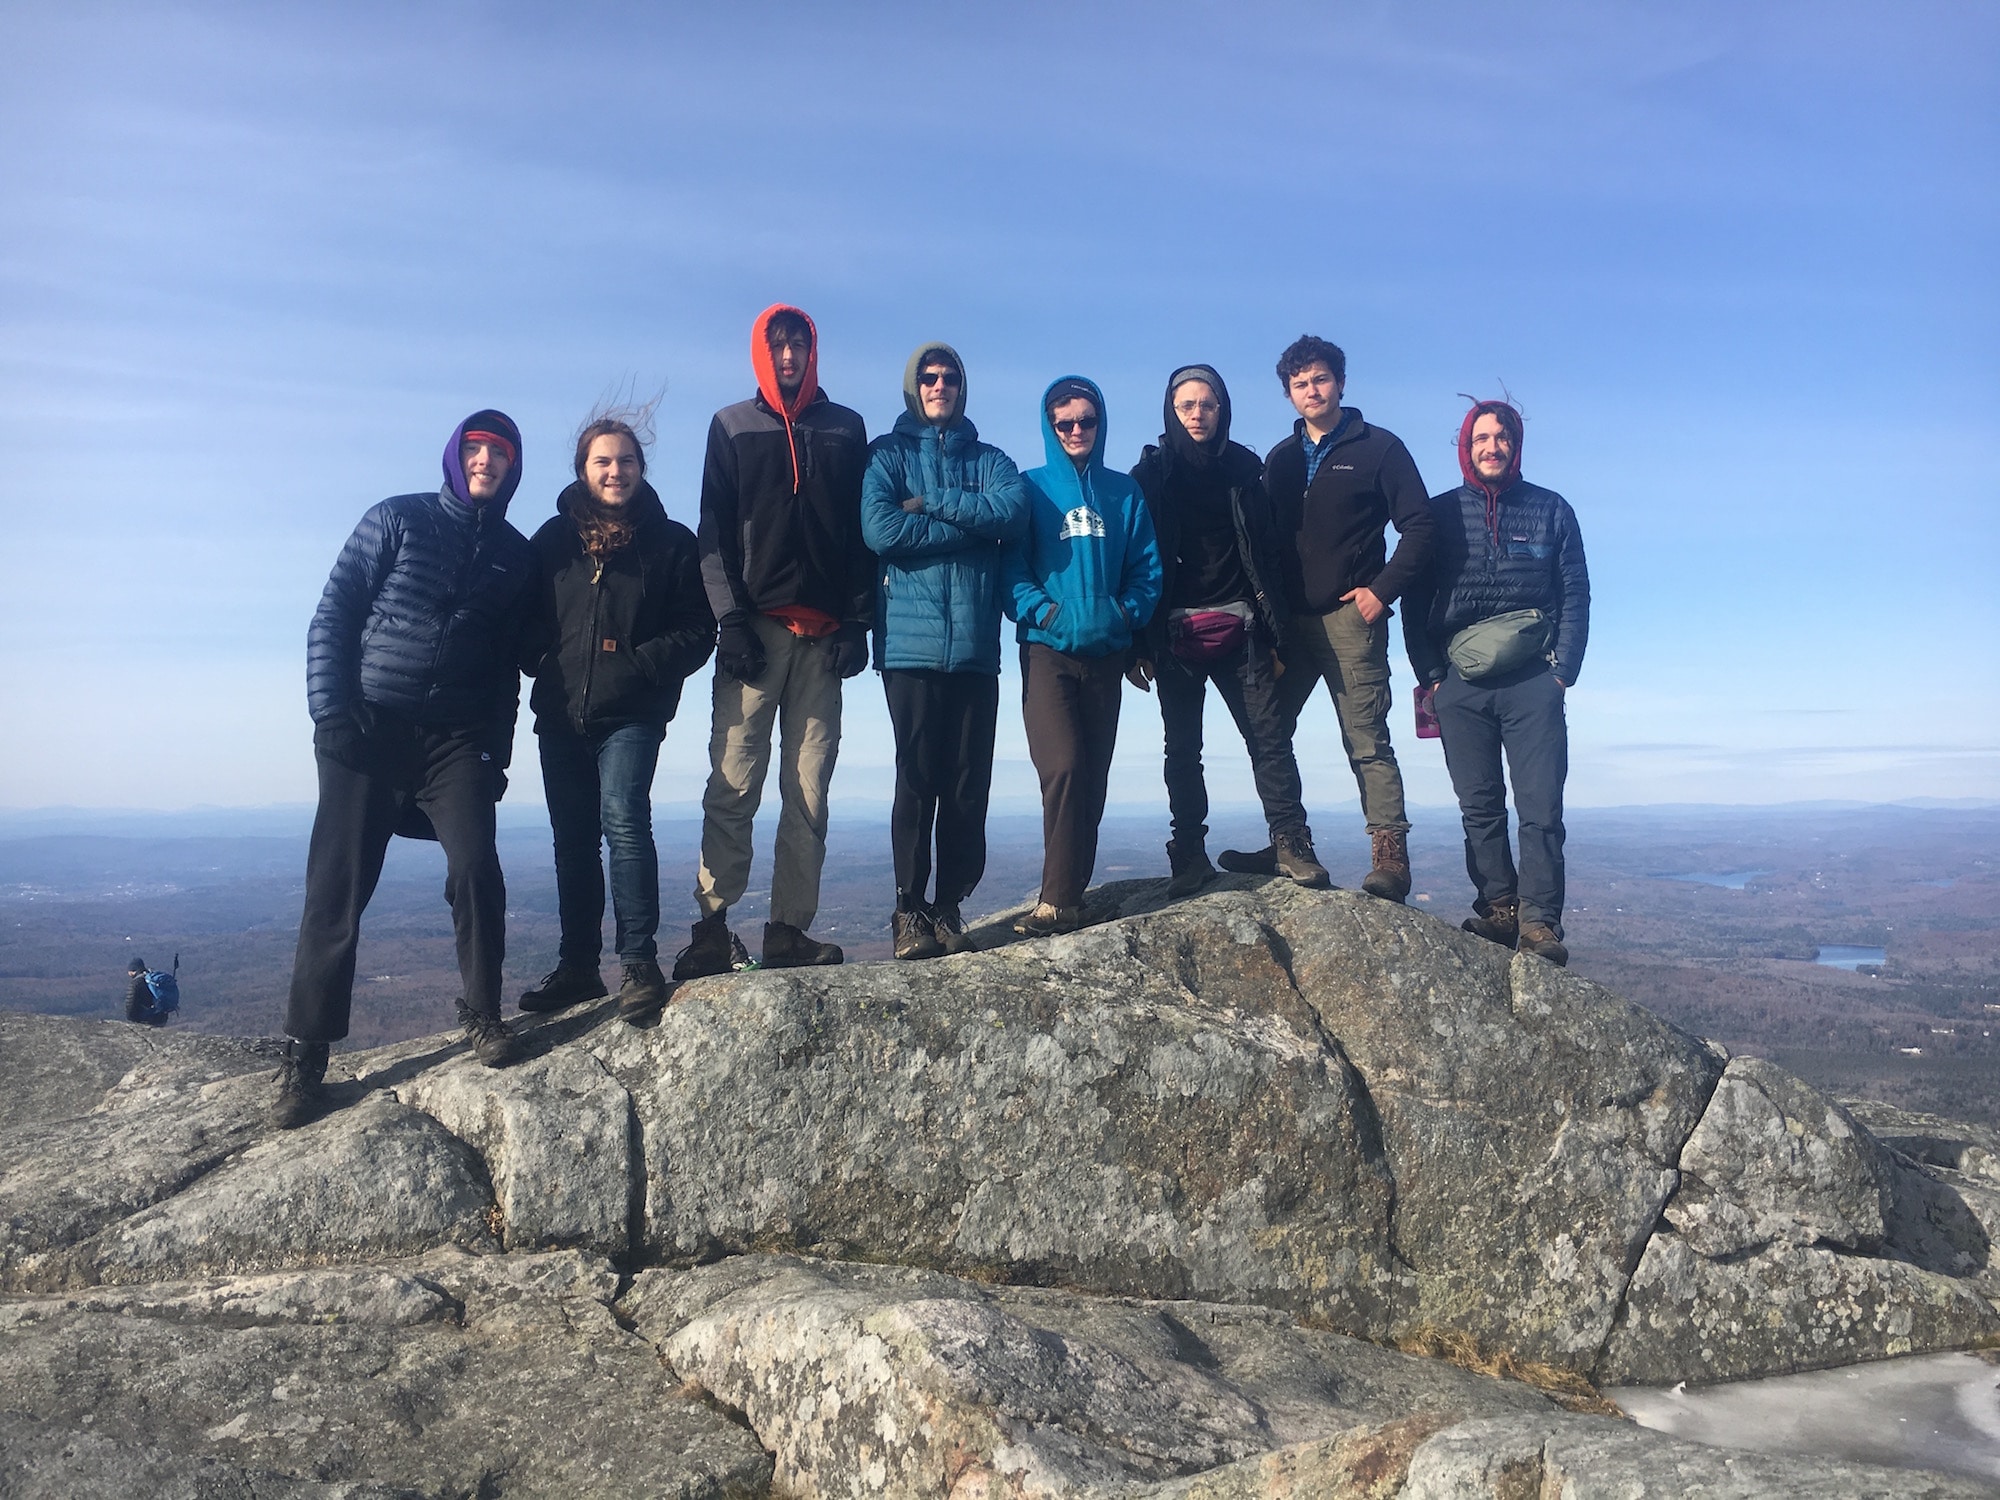 the Fall ‘18 cohort at the summit of our neighbor mountain, Mt. Monadnock